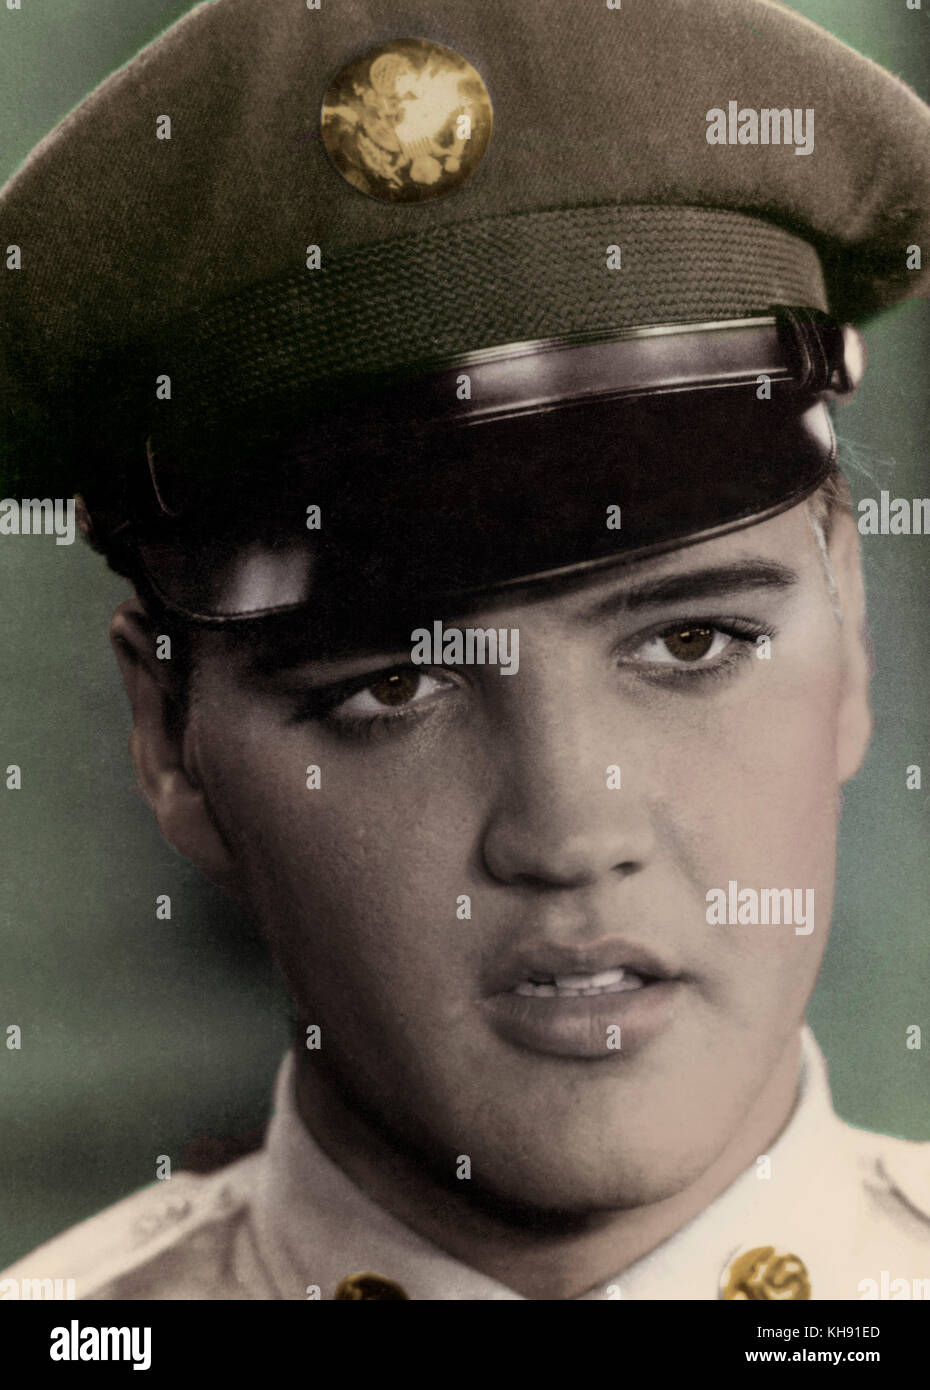 Elvis Aaron PRESLEY as GI, portrait . American singer and actor. 8 January 1935 - 16 August 1977 Stock Photo